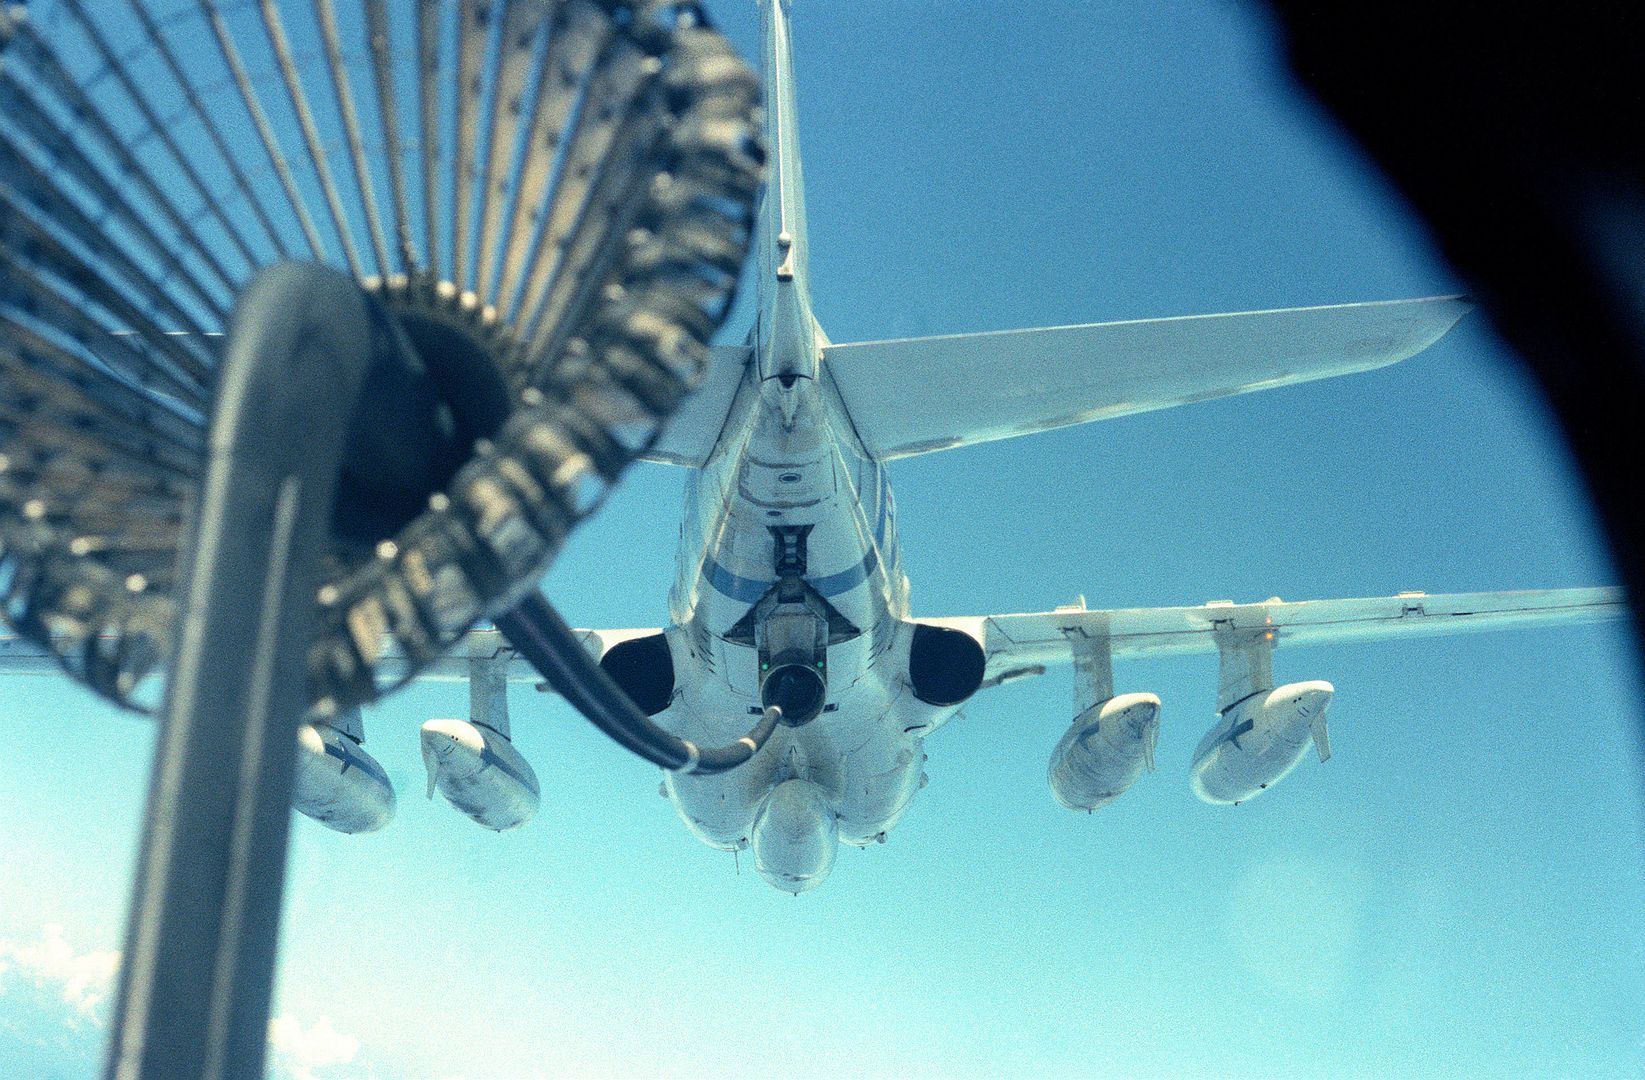 A View Of The Refueling Drogue From A KA 6D Intruder Tanker Aircraft Connected To The Refueling Probe Of An A 6 Intruder Aircraft